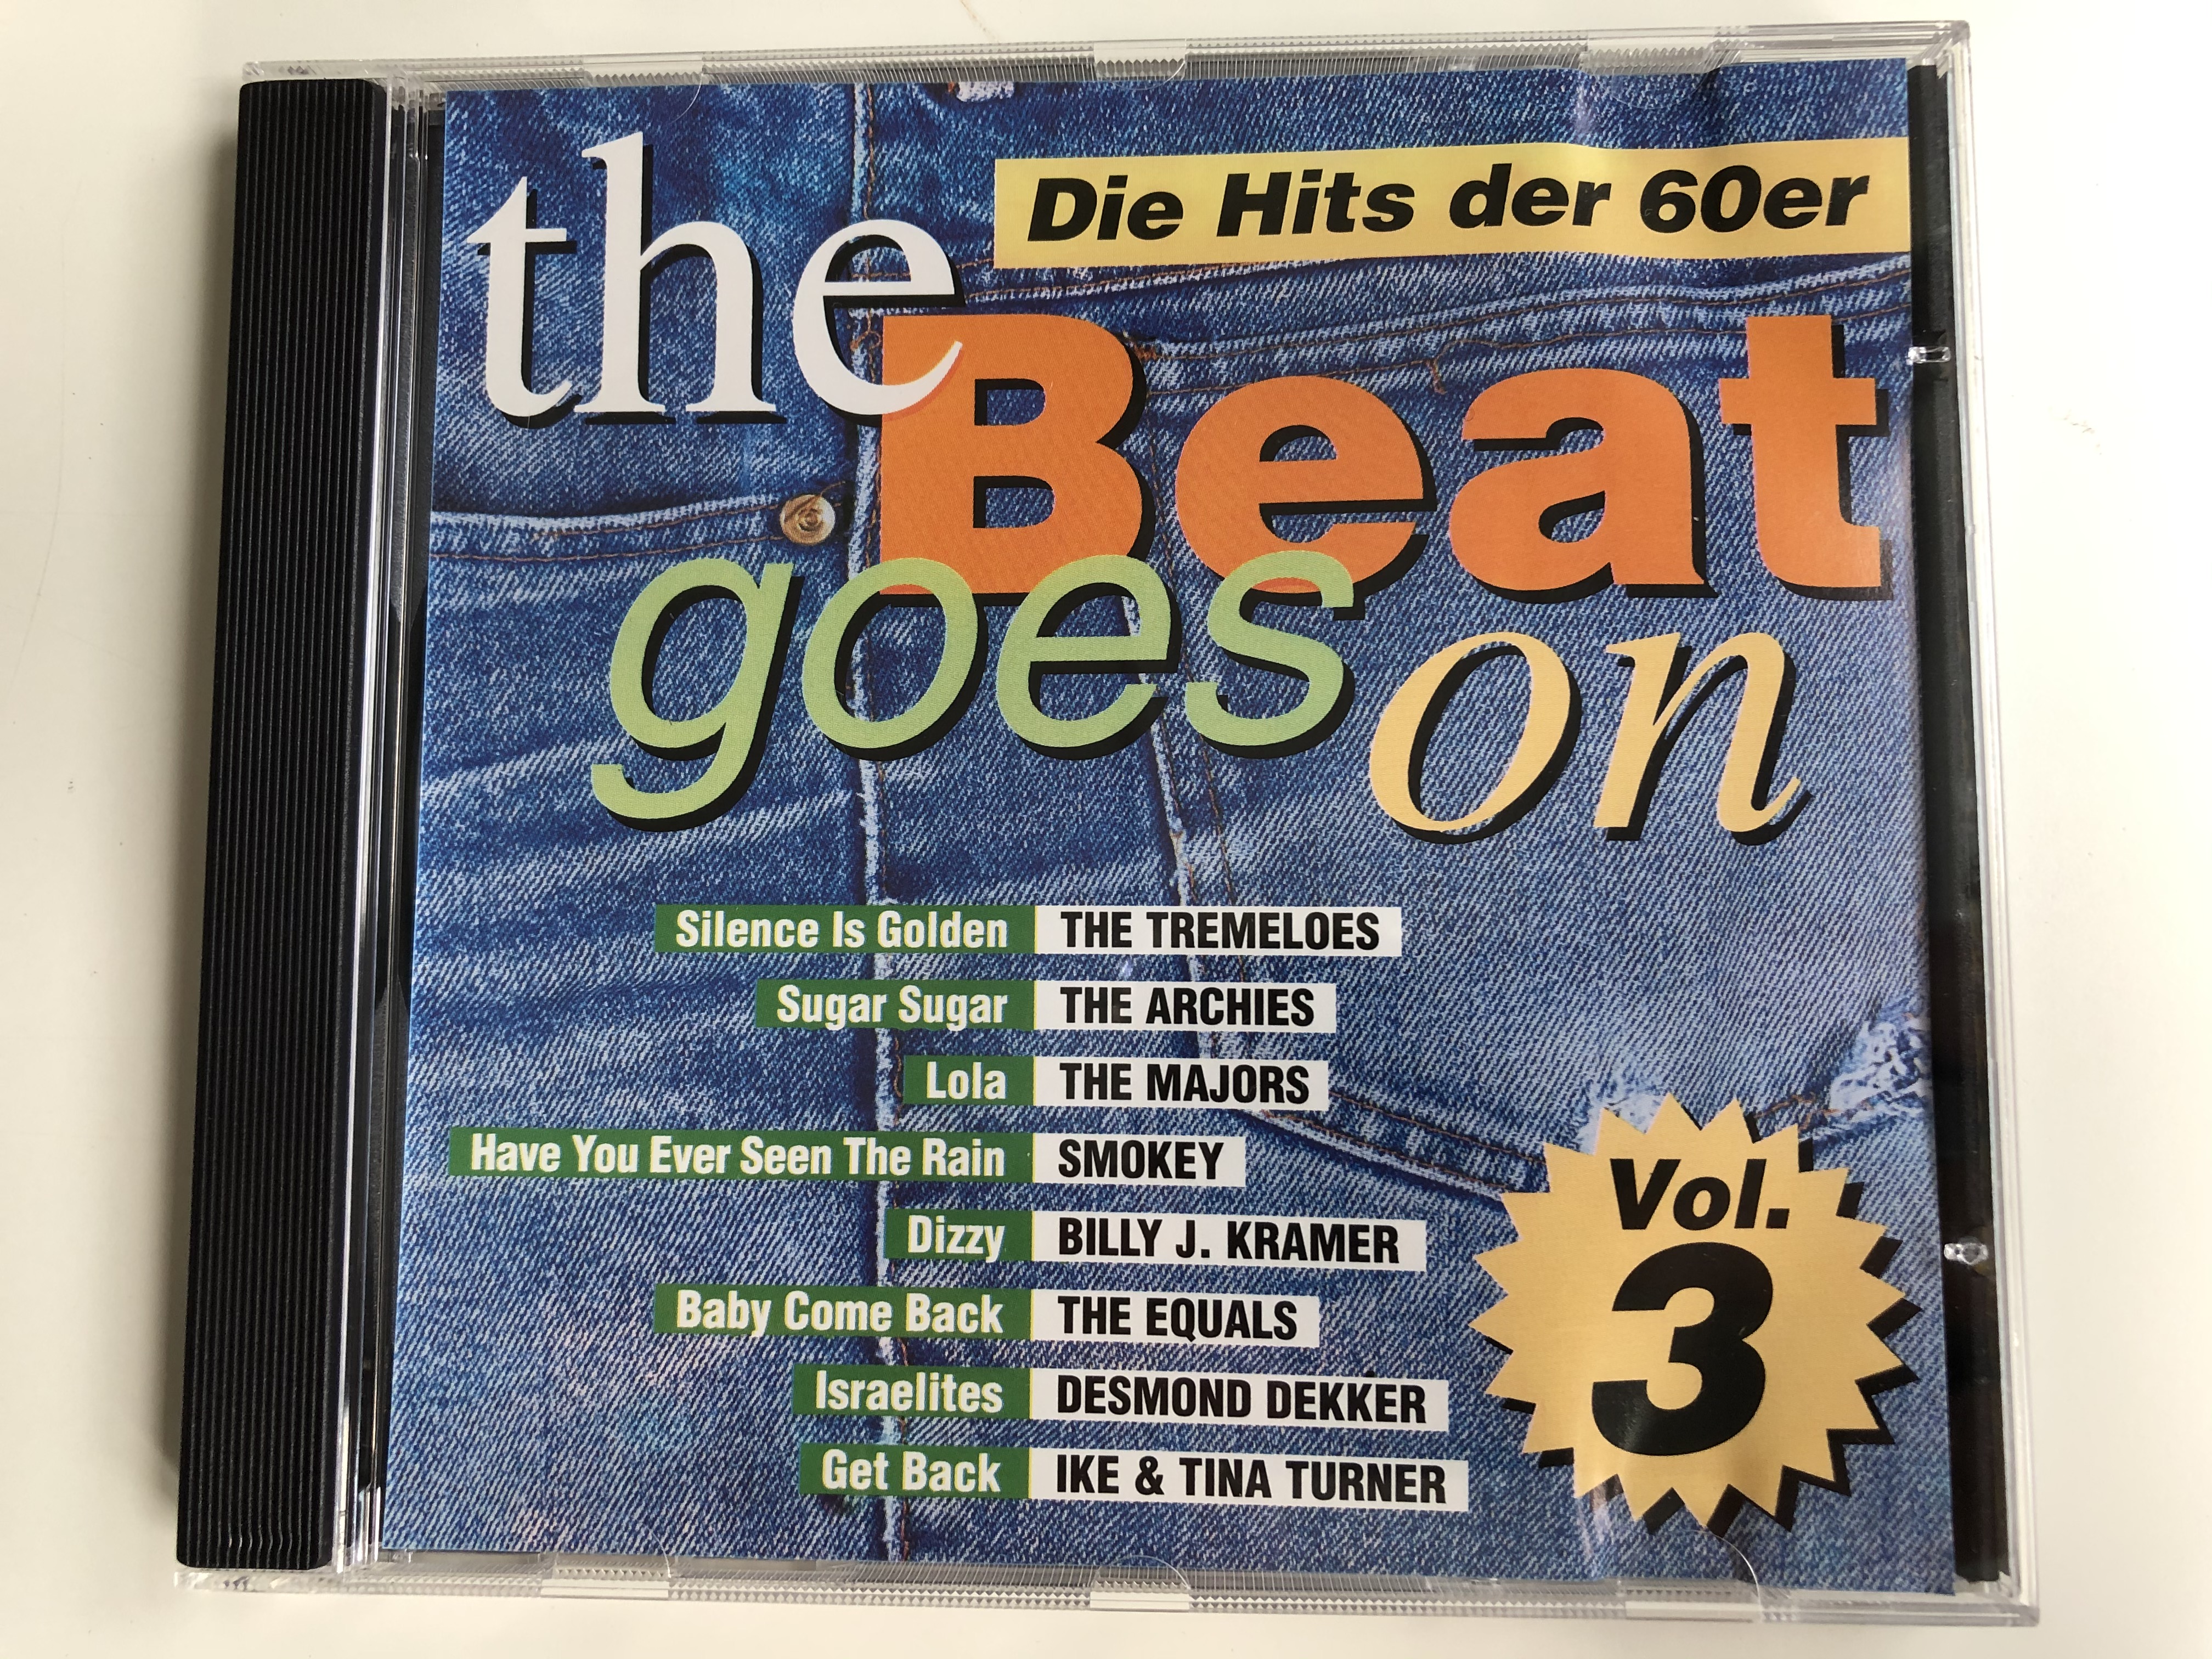 the-beat-goes-on-die-hits-der-60er-vol.-3-silence-is-golden-the-tremeloes-sugar-sugar-the-archies-lola-the-majors-have-you-ever-seen-the-rain-smokie-dizzy-billy-j.-kramer-1-.jpg